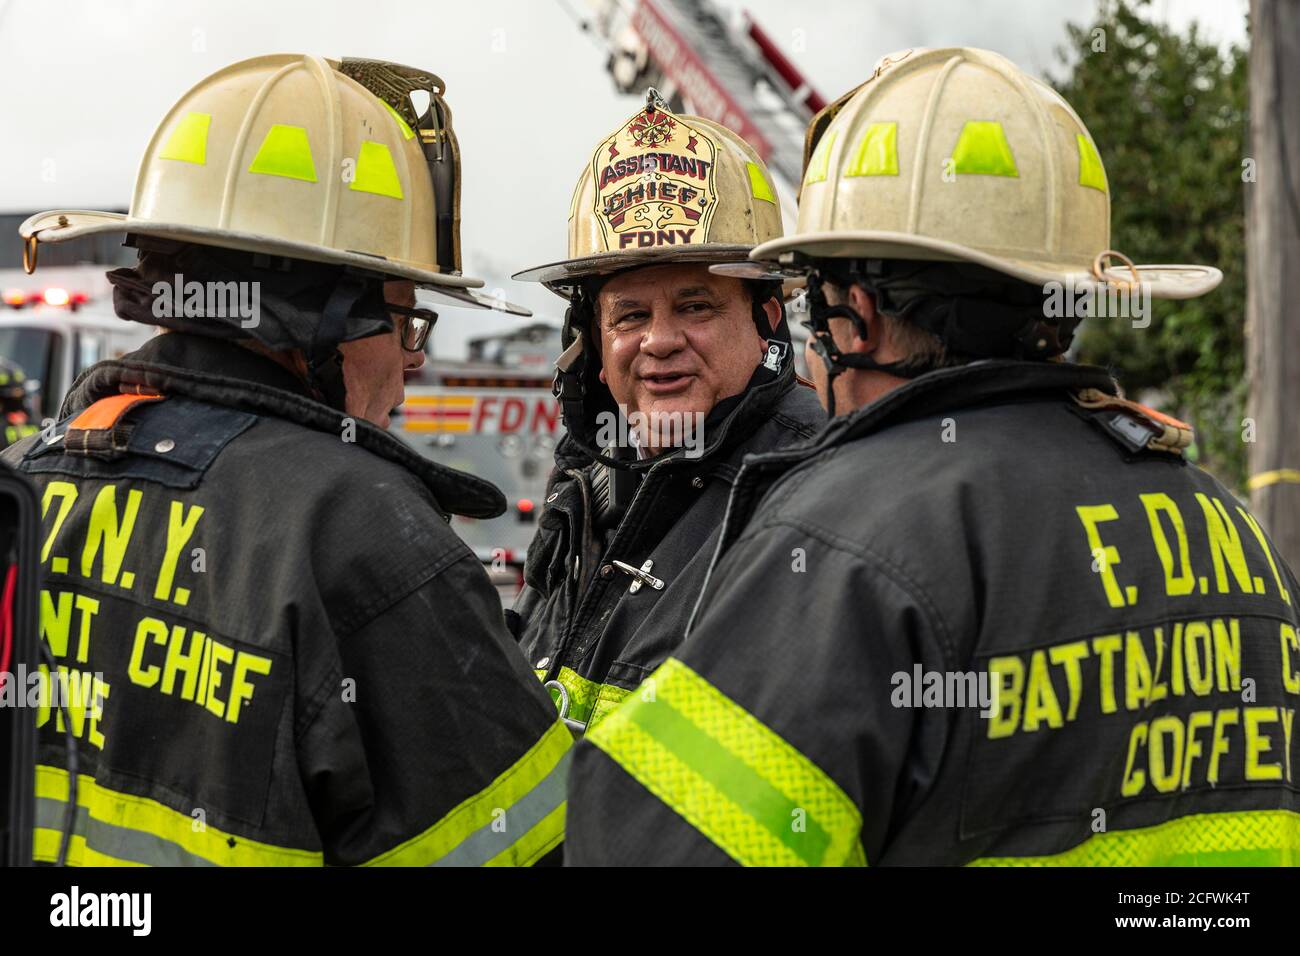 New York, United States. 07th Sep, 2020. Bureau of Operations Assistant Chief Richard Blatus seen where firefighters battle massive salvage yard 4 alarm fire in the Bronx Hunts Point section of New York on September 7, 2020. More than FDNY 70 units with 175 firefighters were involved to tackle the fire. (Photo by Lev Radin/Sipa USA) Credit: Sipa USA/Alamy Live News Stock Photo